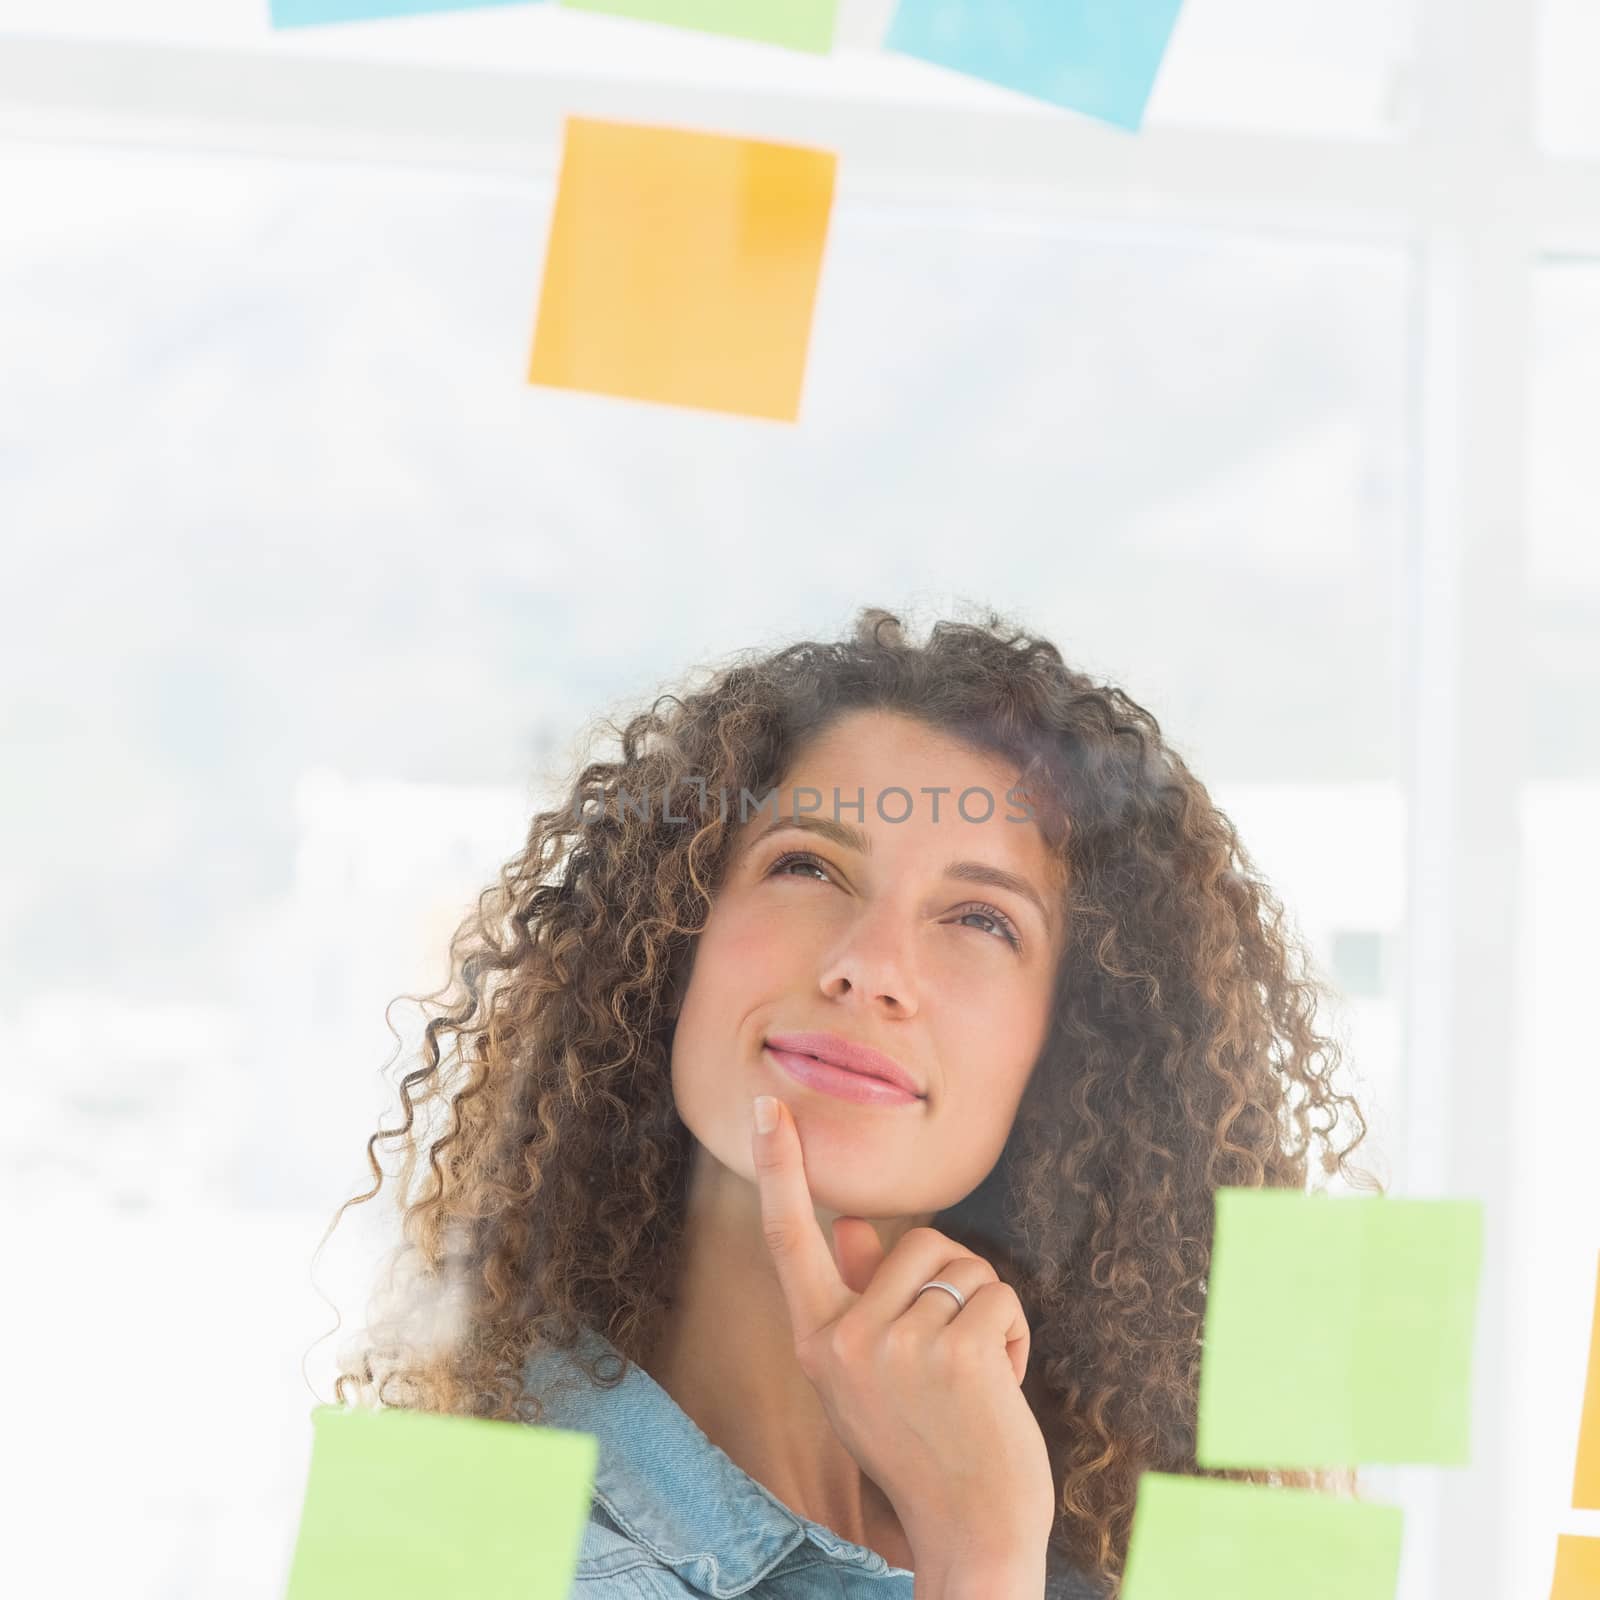 Thinking smiling designer looking at sticky notes on window in creative office